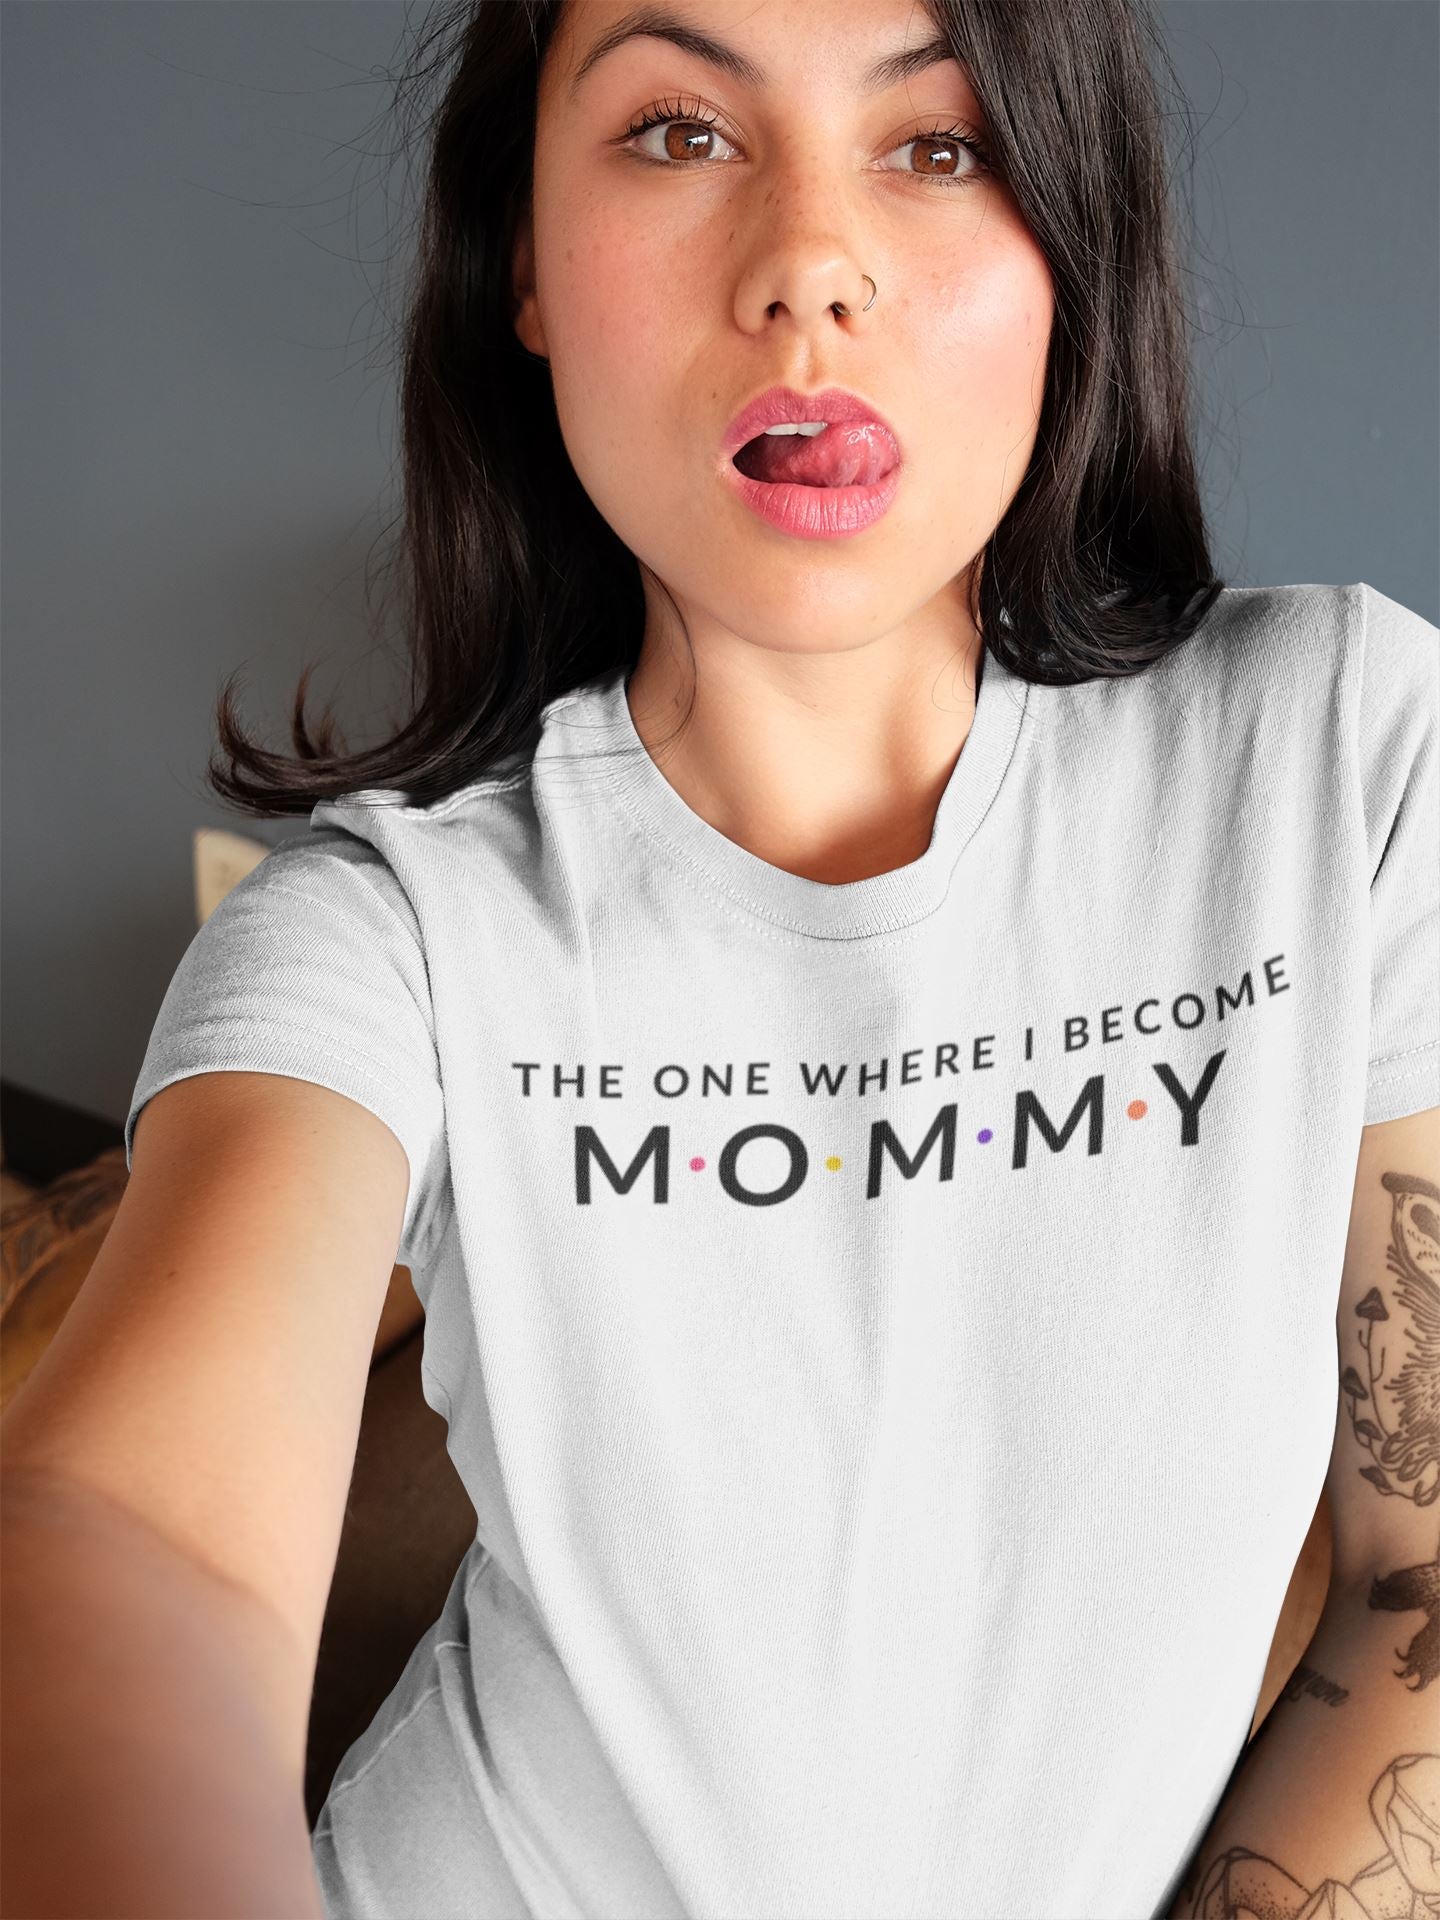 The One Where I Become Mommy Supreme White T Shirt for Women freeshipping - Catch My Drift India